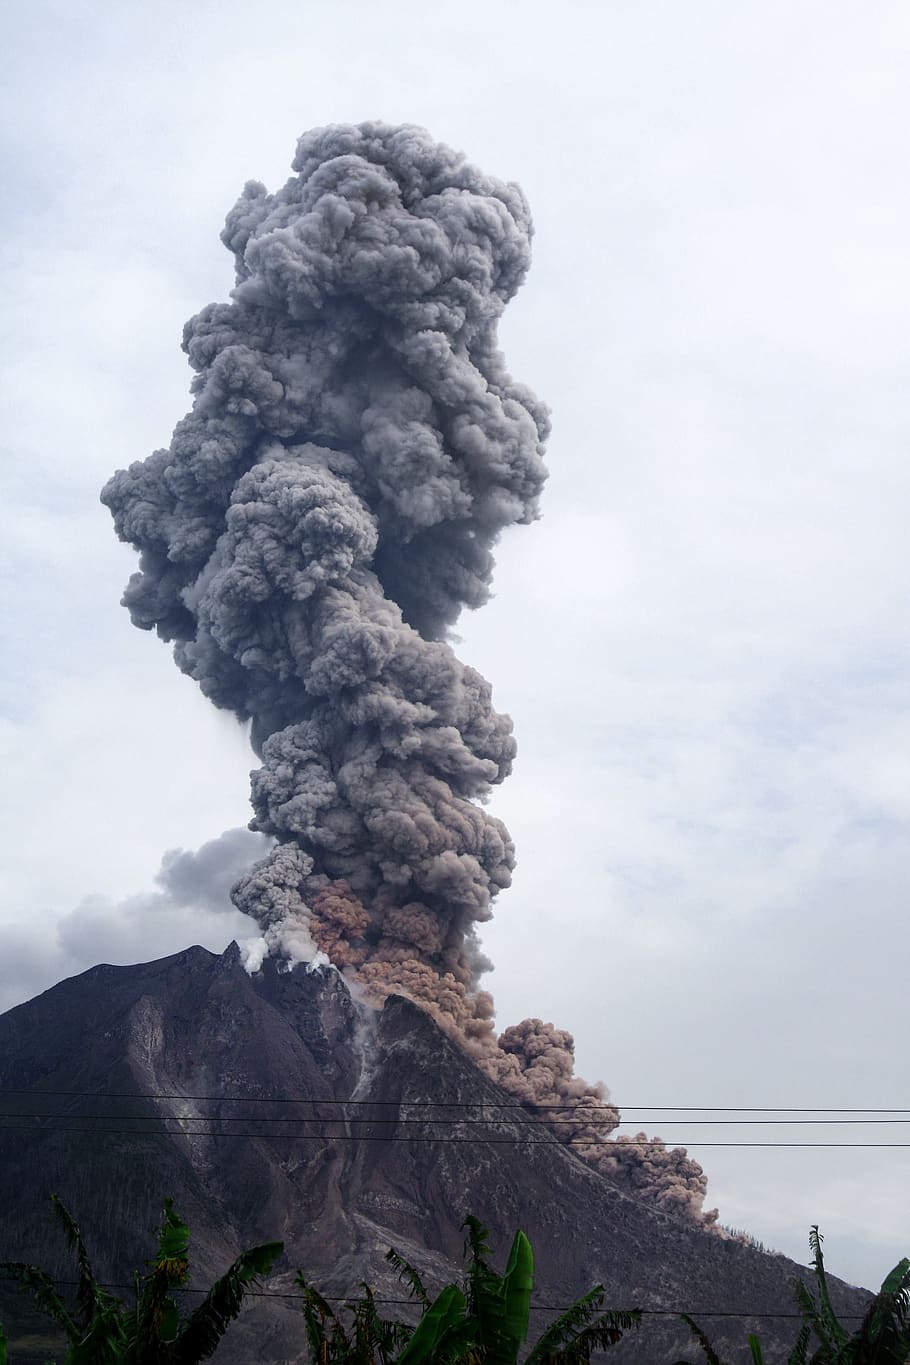 sinabung, mount sinabung, north sumatra, landscape, sky, smoke - physical structure, nature, cloud - sky, mountain, day